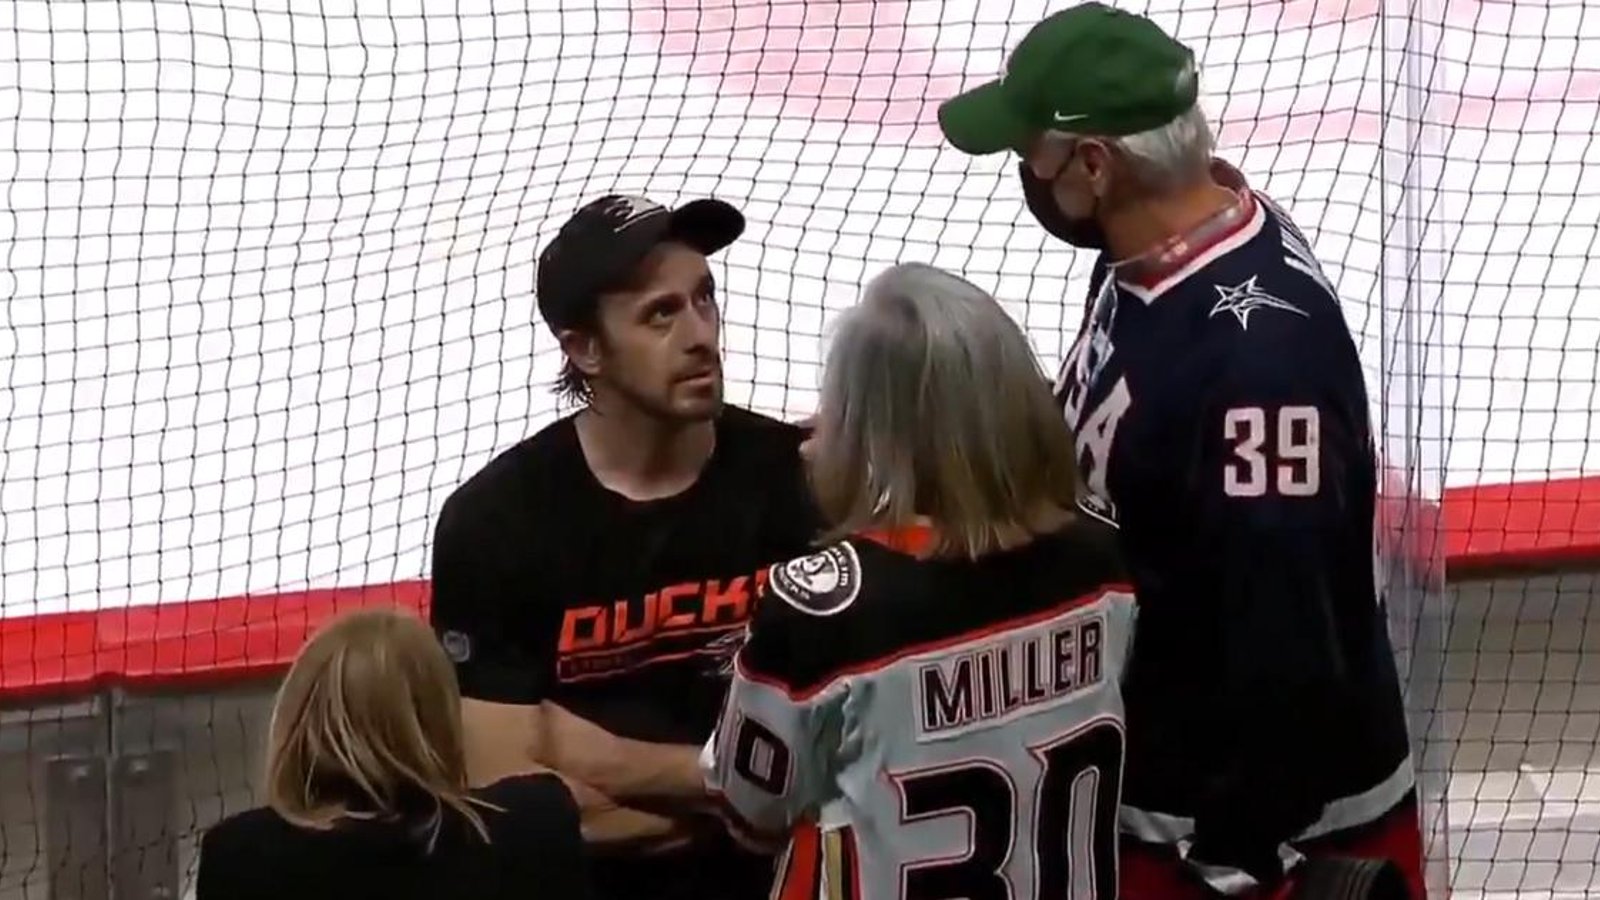 Ryan Miller overcome with emotion after his final game in the NHL.